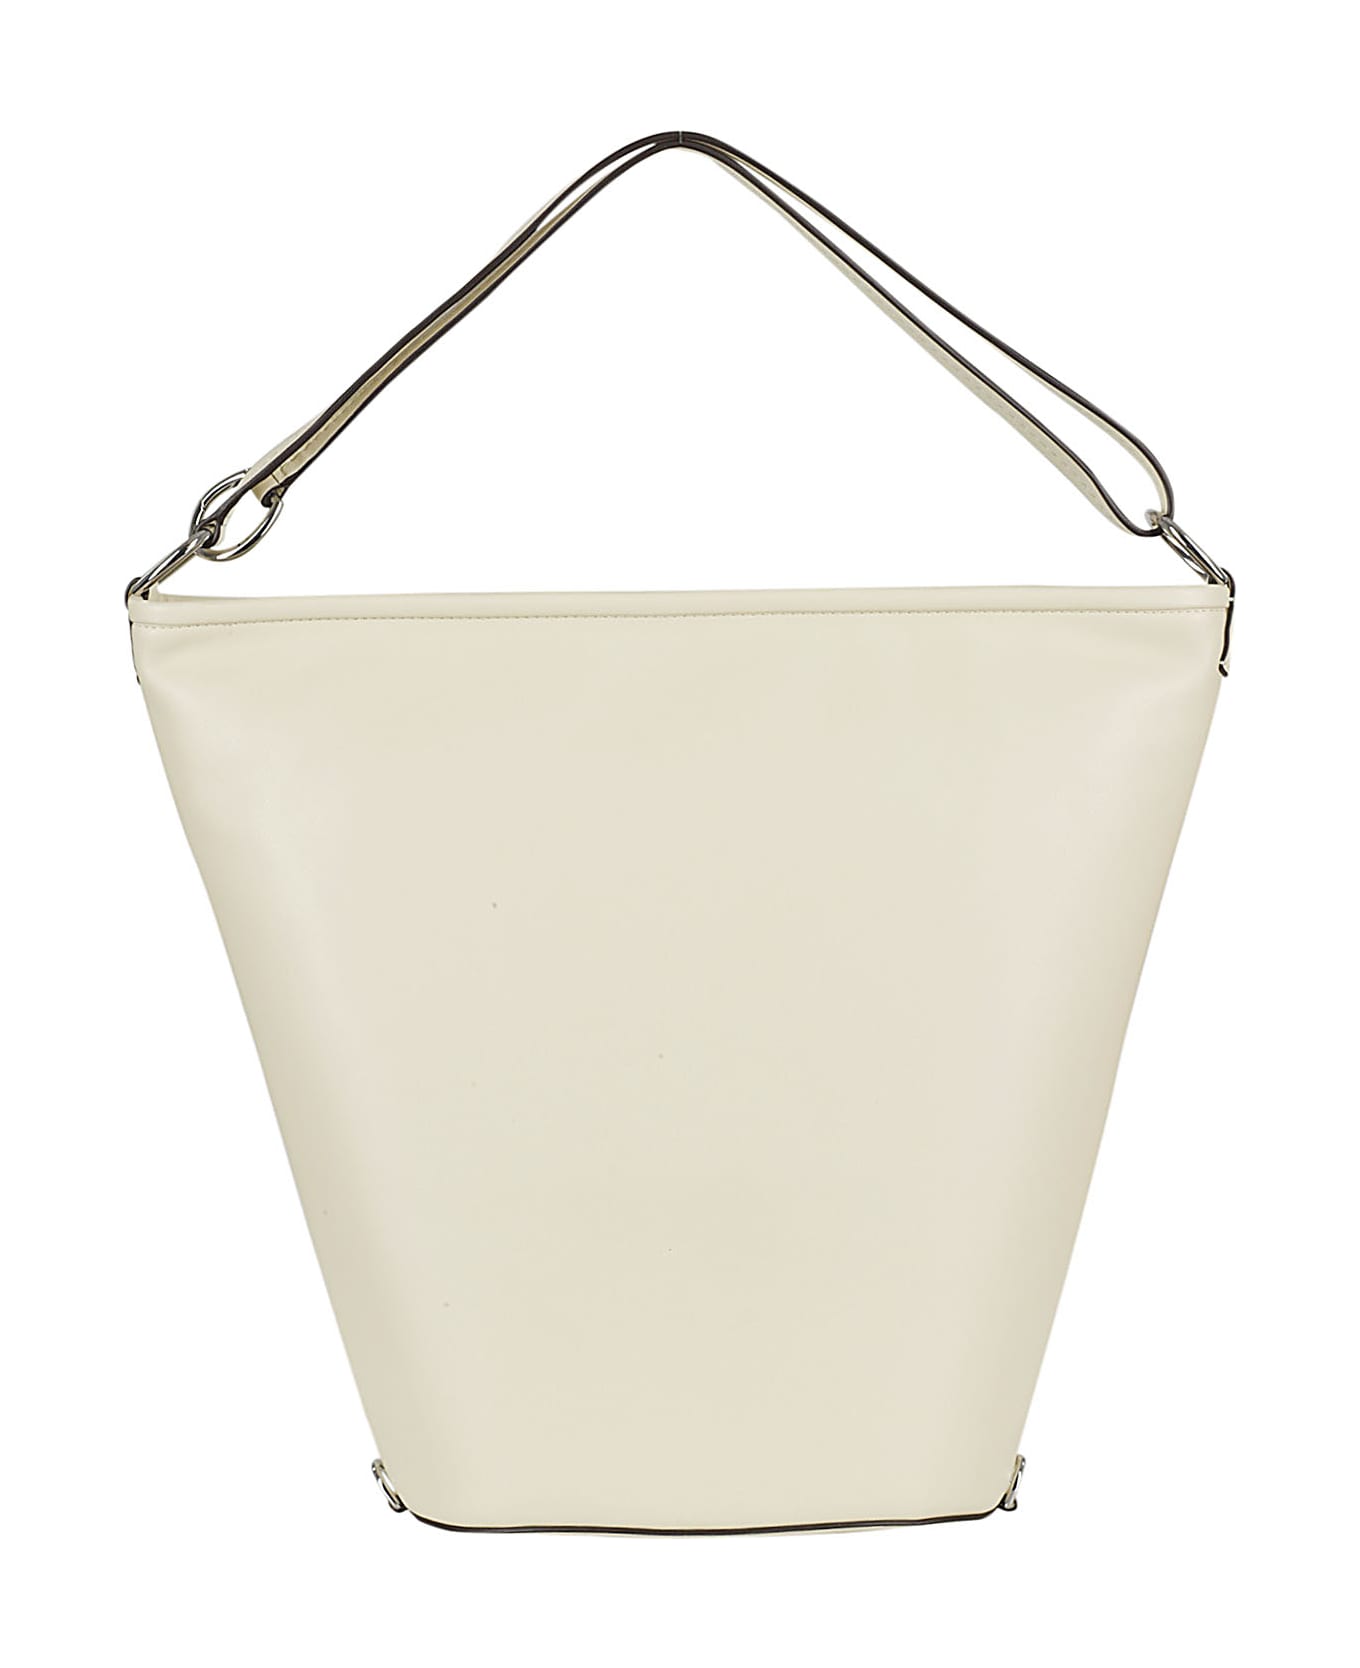 Proenza Schouler White Label Leather Spring Bucket Bag トートバッグ